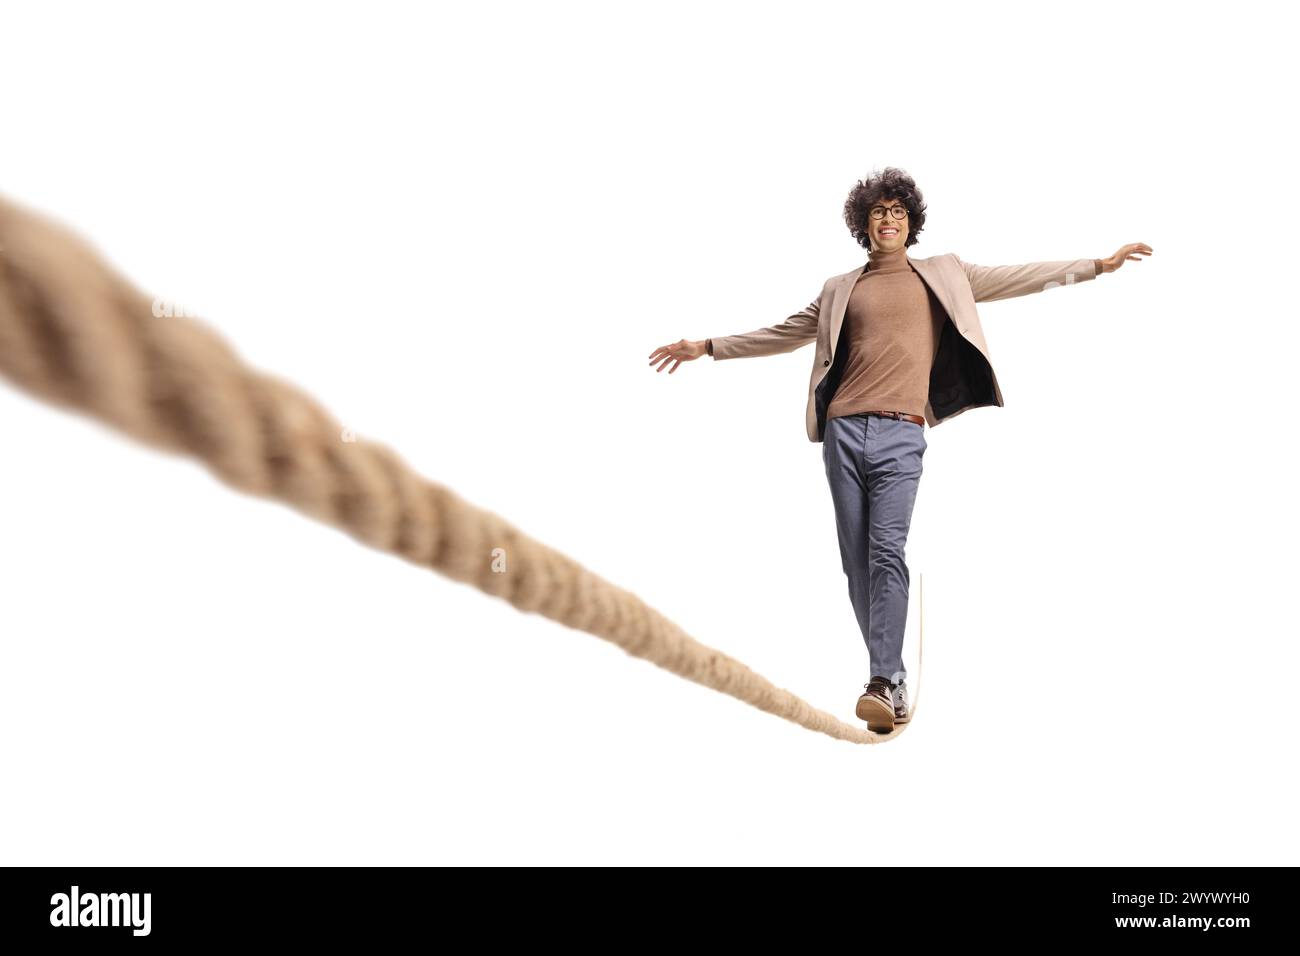 Excited young man with curly hair walking on a tightrope and smiling isolated on white background Stock Photo